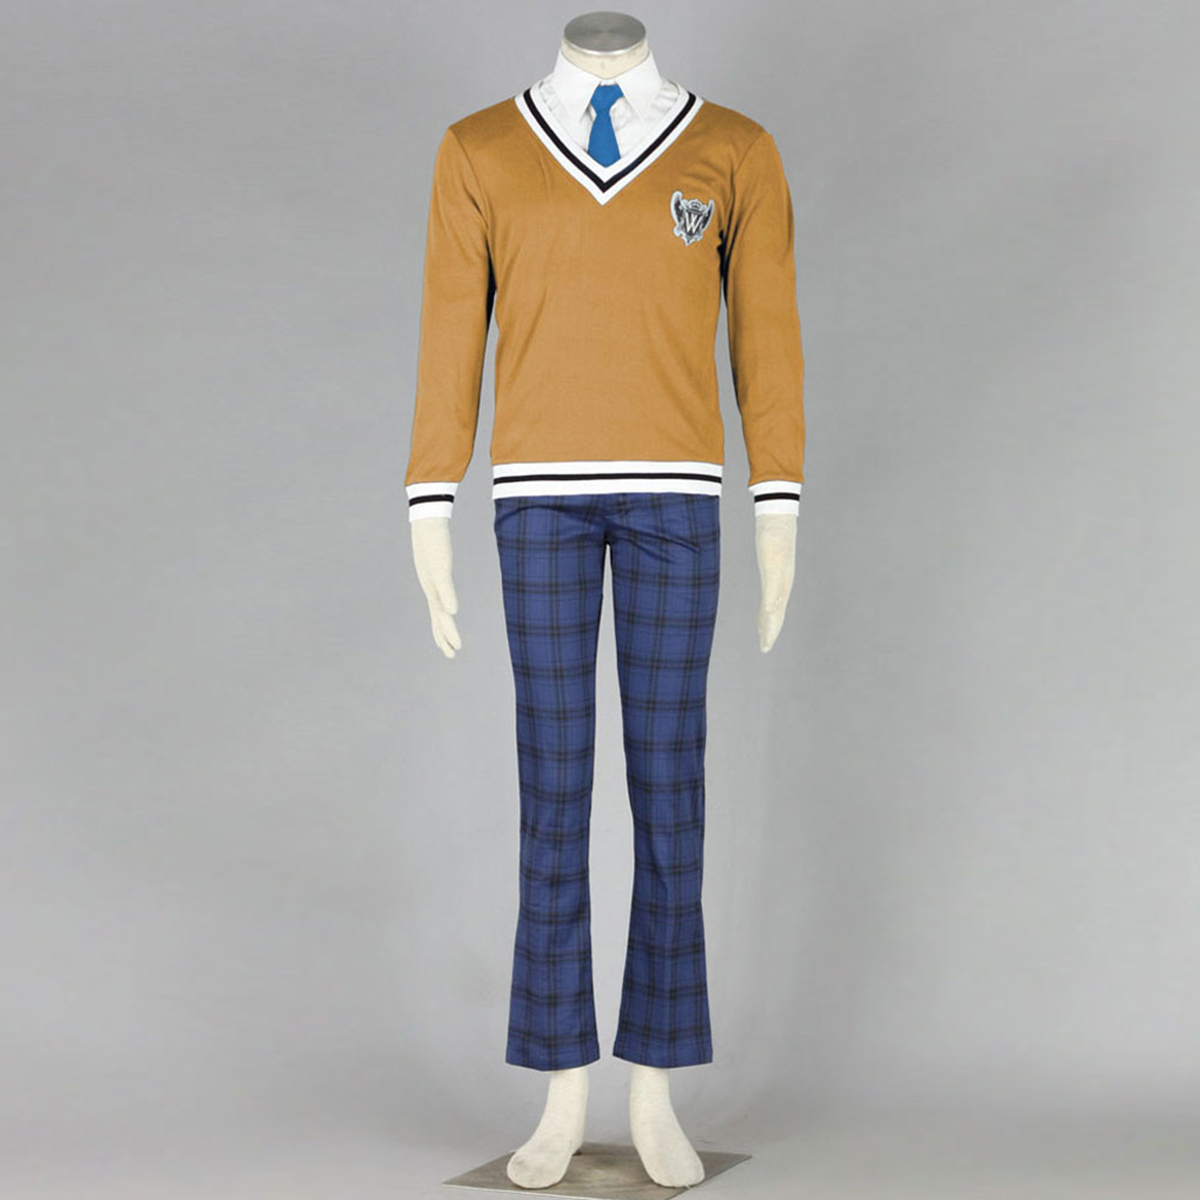 Axis Powers Hetalia Winter Male School Uniform 1 Anime Cosplay Costumes Outfit